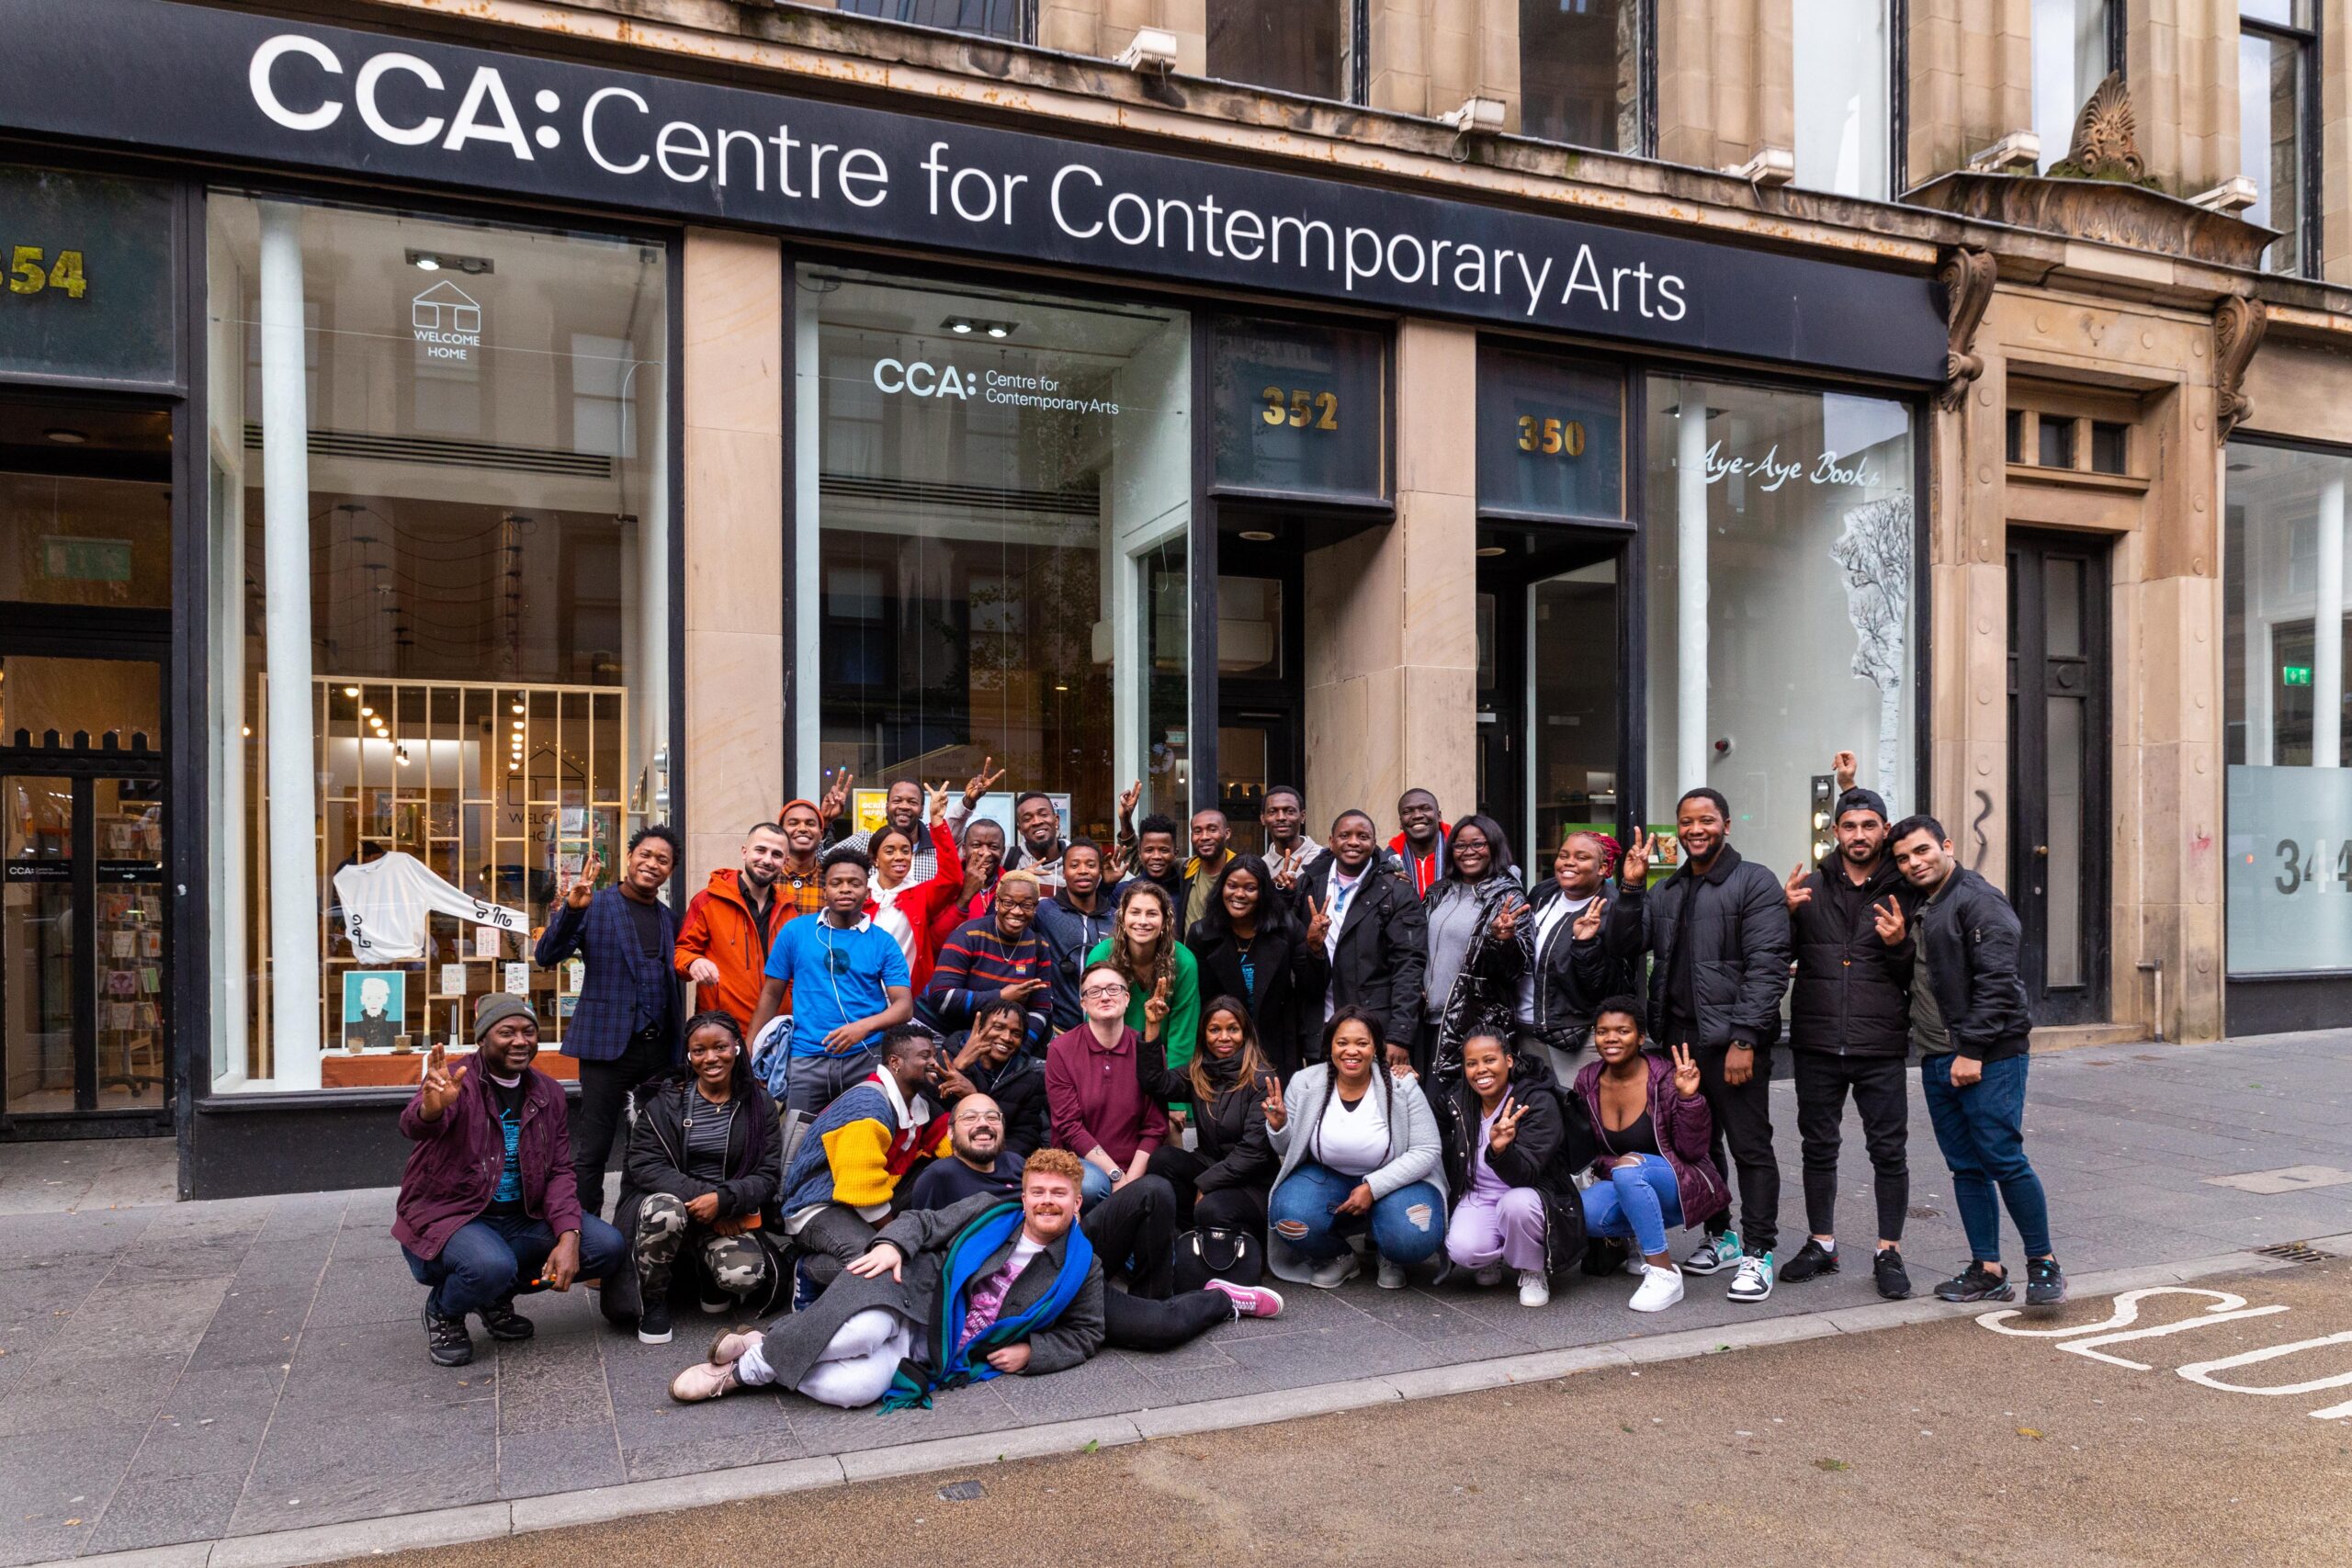 Group photo of SQIFF Team and LGBT Unity Members outside the Centre for Contemporary Arts